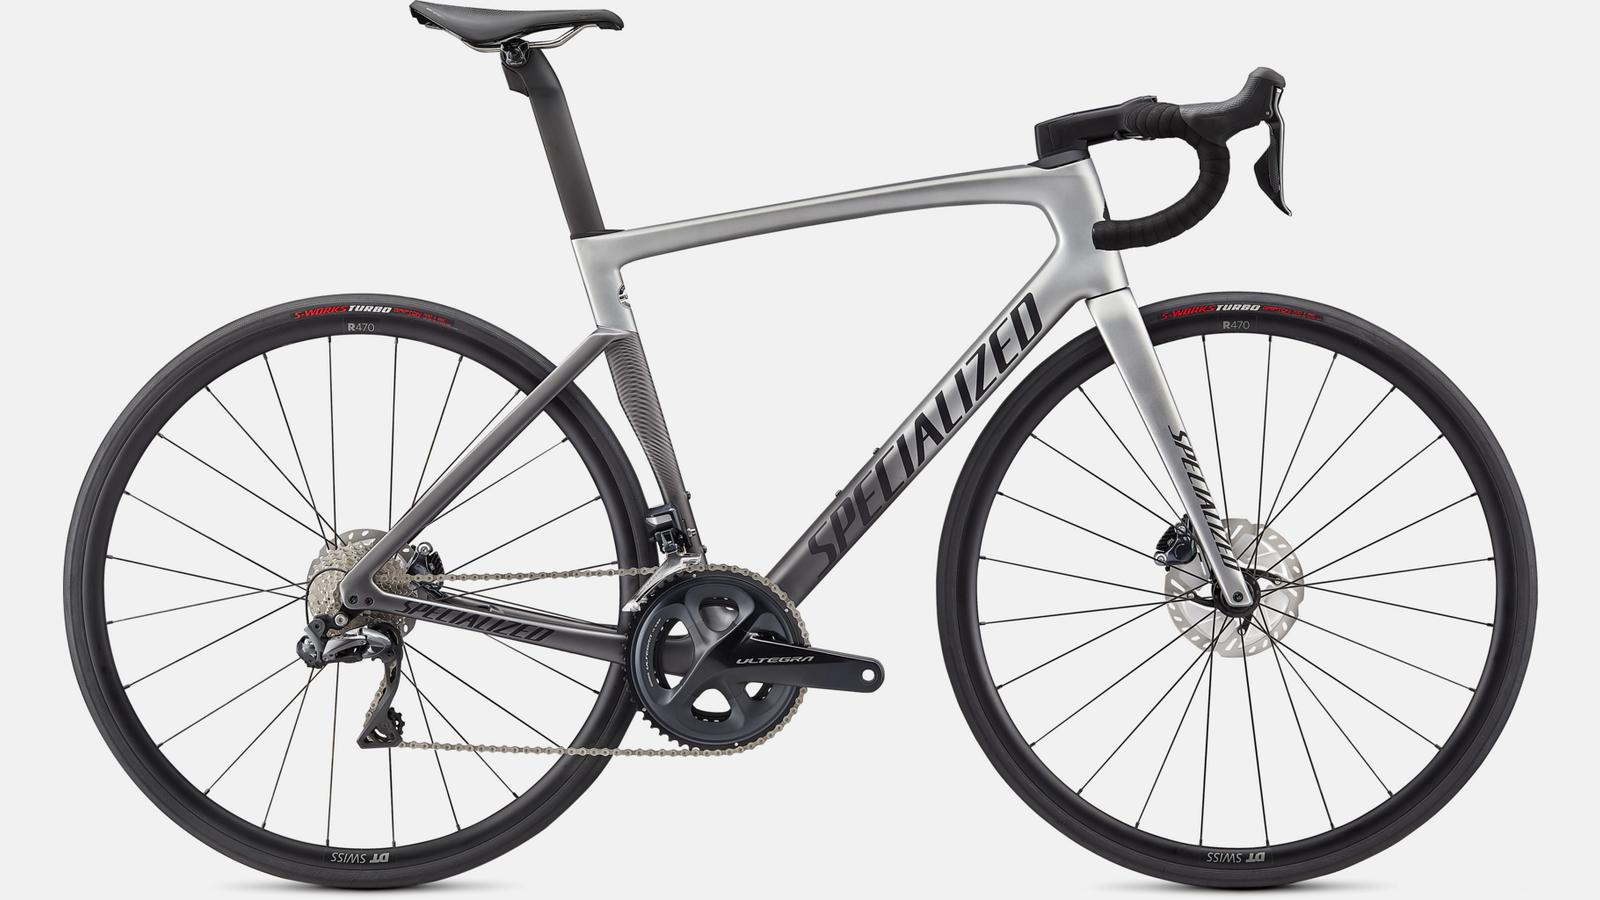 Paint for 2021 Specialized Tarmac SL7 Expert - Ultegra Di2 - Satin Light Silver